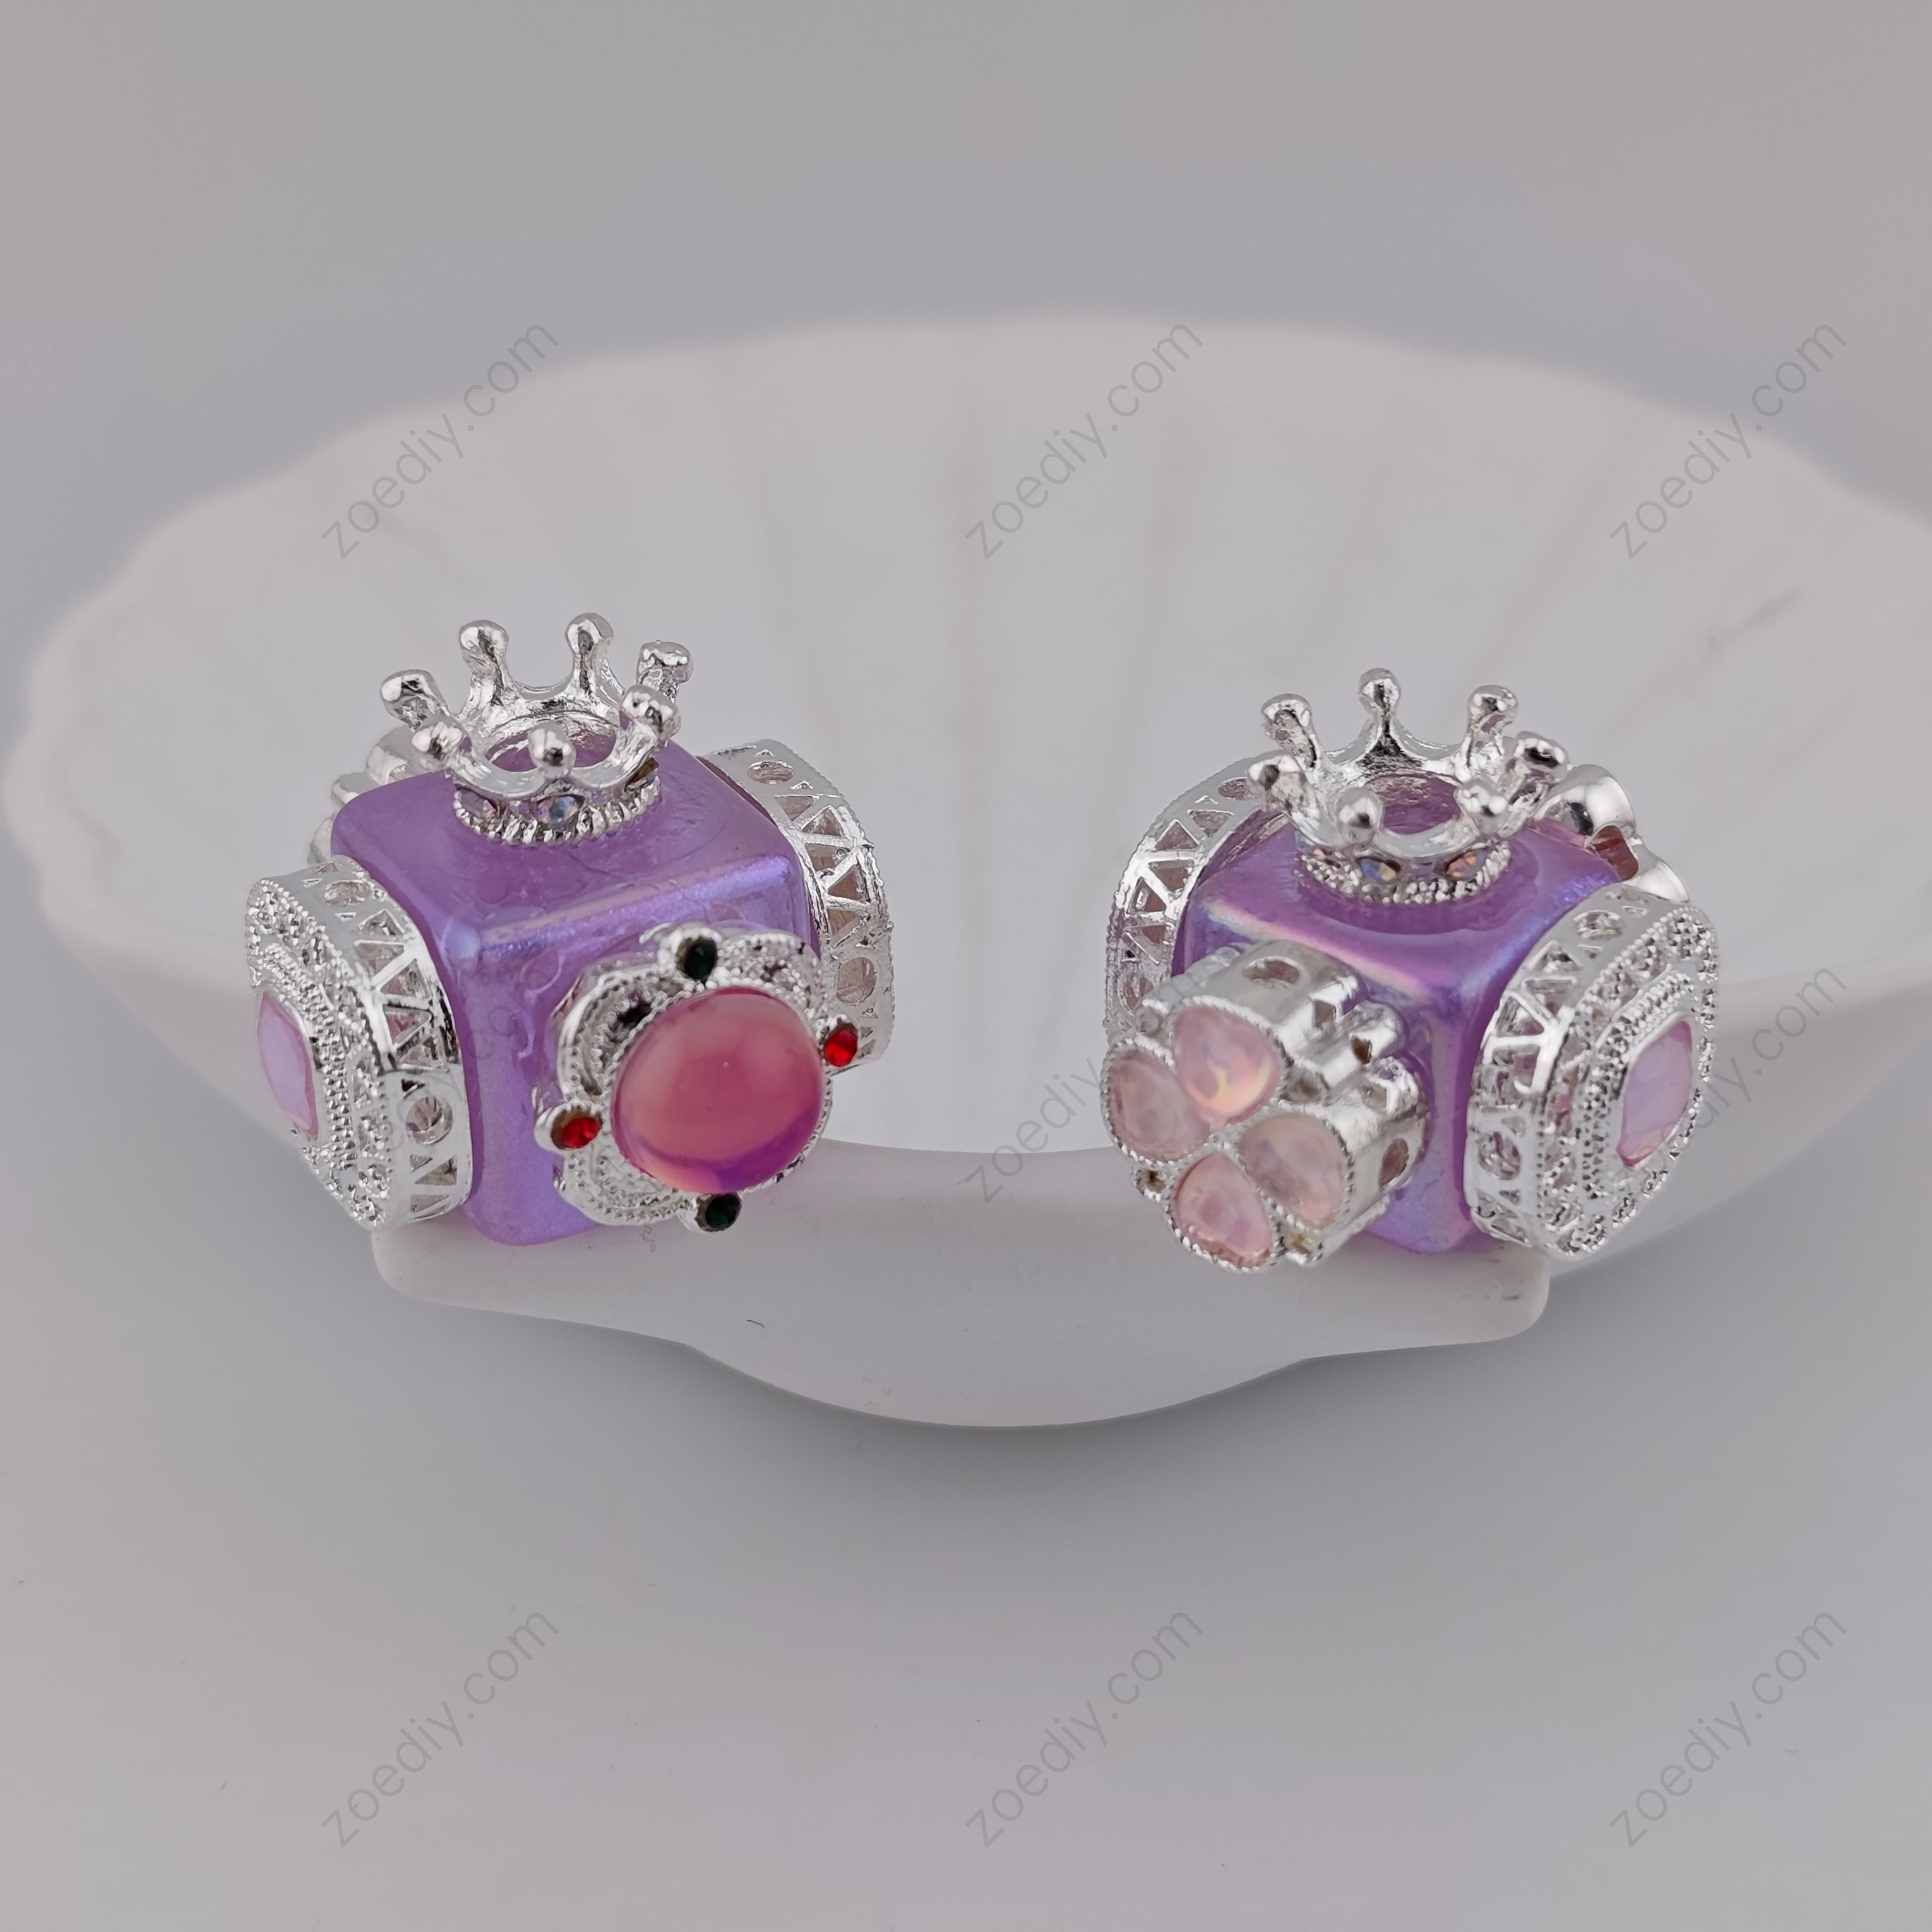 (K972) 1 Piece Silver Sparkling Beads With 4 Pink Heart and Crown